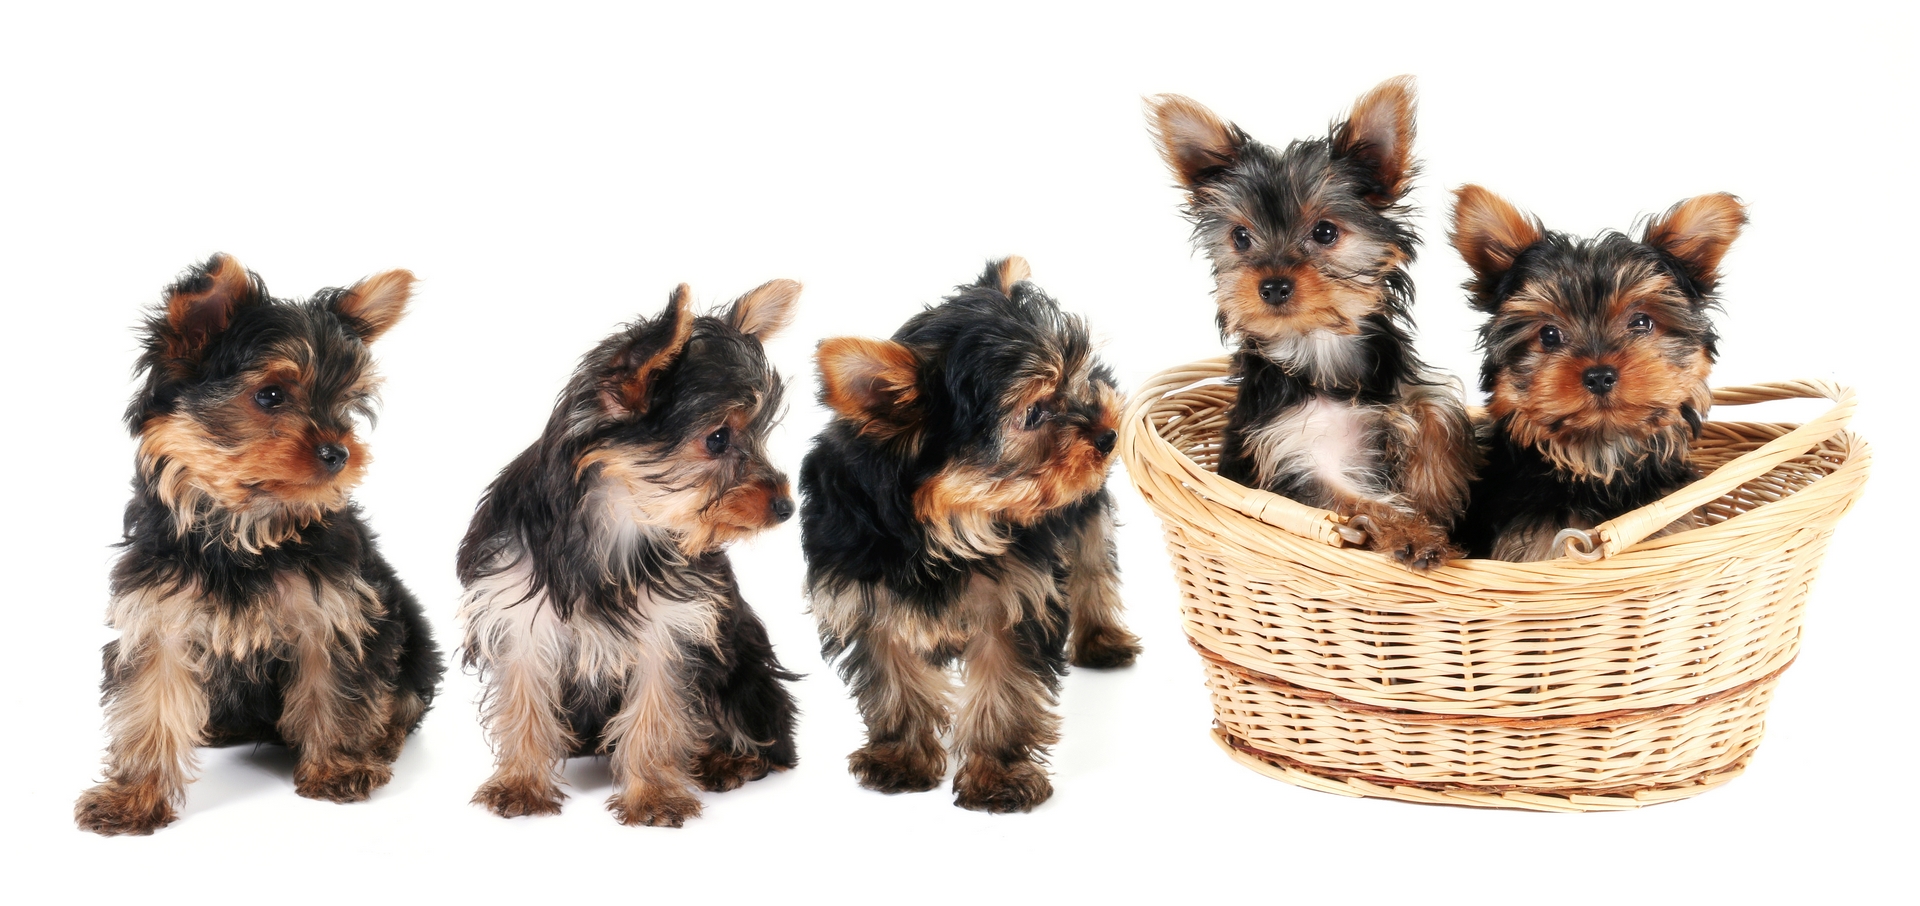 Looking for a Yorkie?